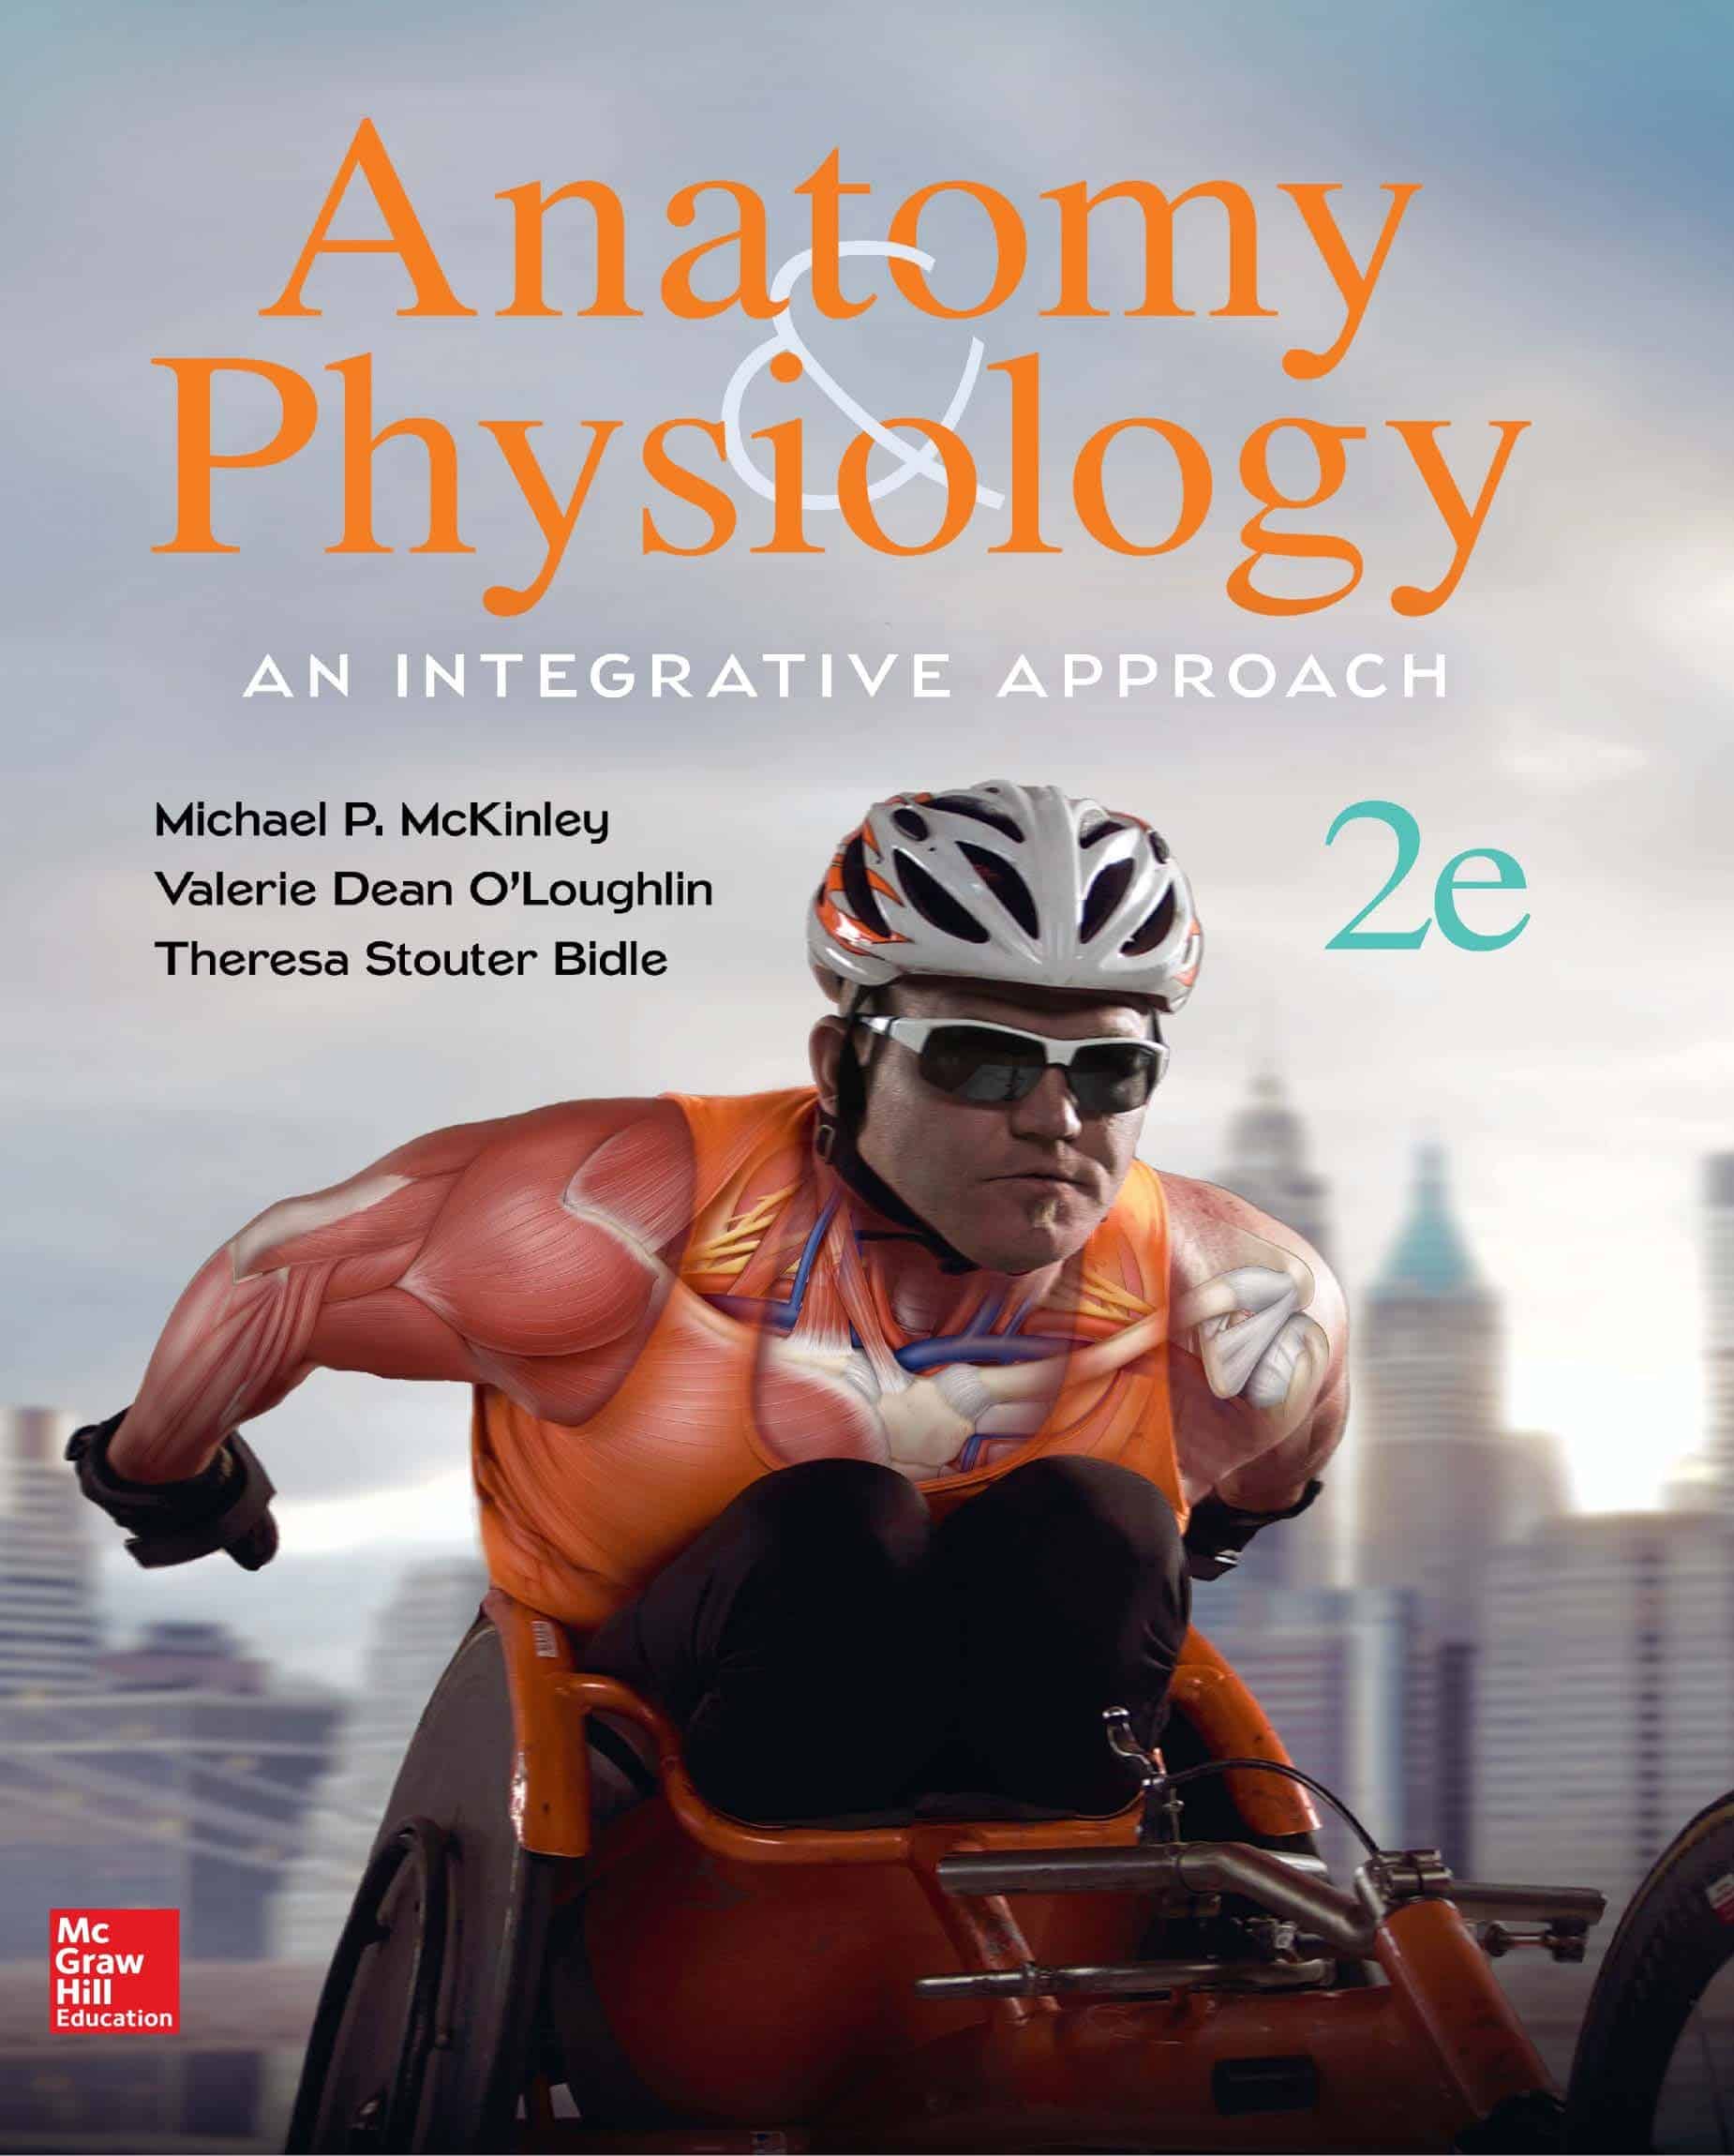 [PDF]Anatomy and Physiology: An Integrative Approach 2nd Edition by Michael McKinley, Theresa Bidle, and Valerie O’Loughlin